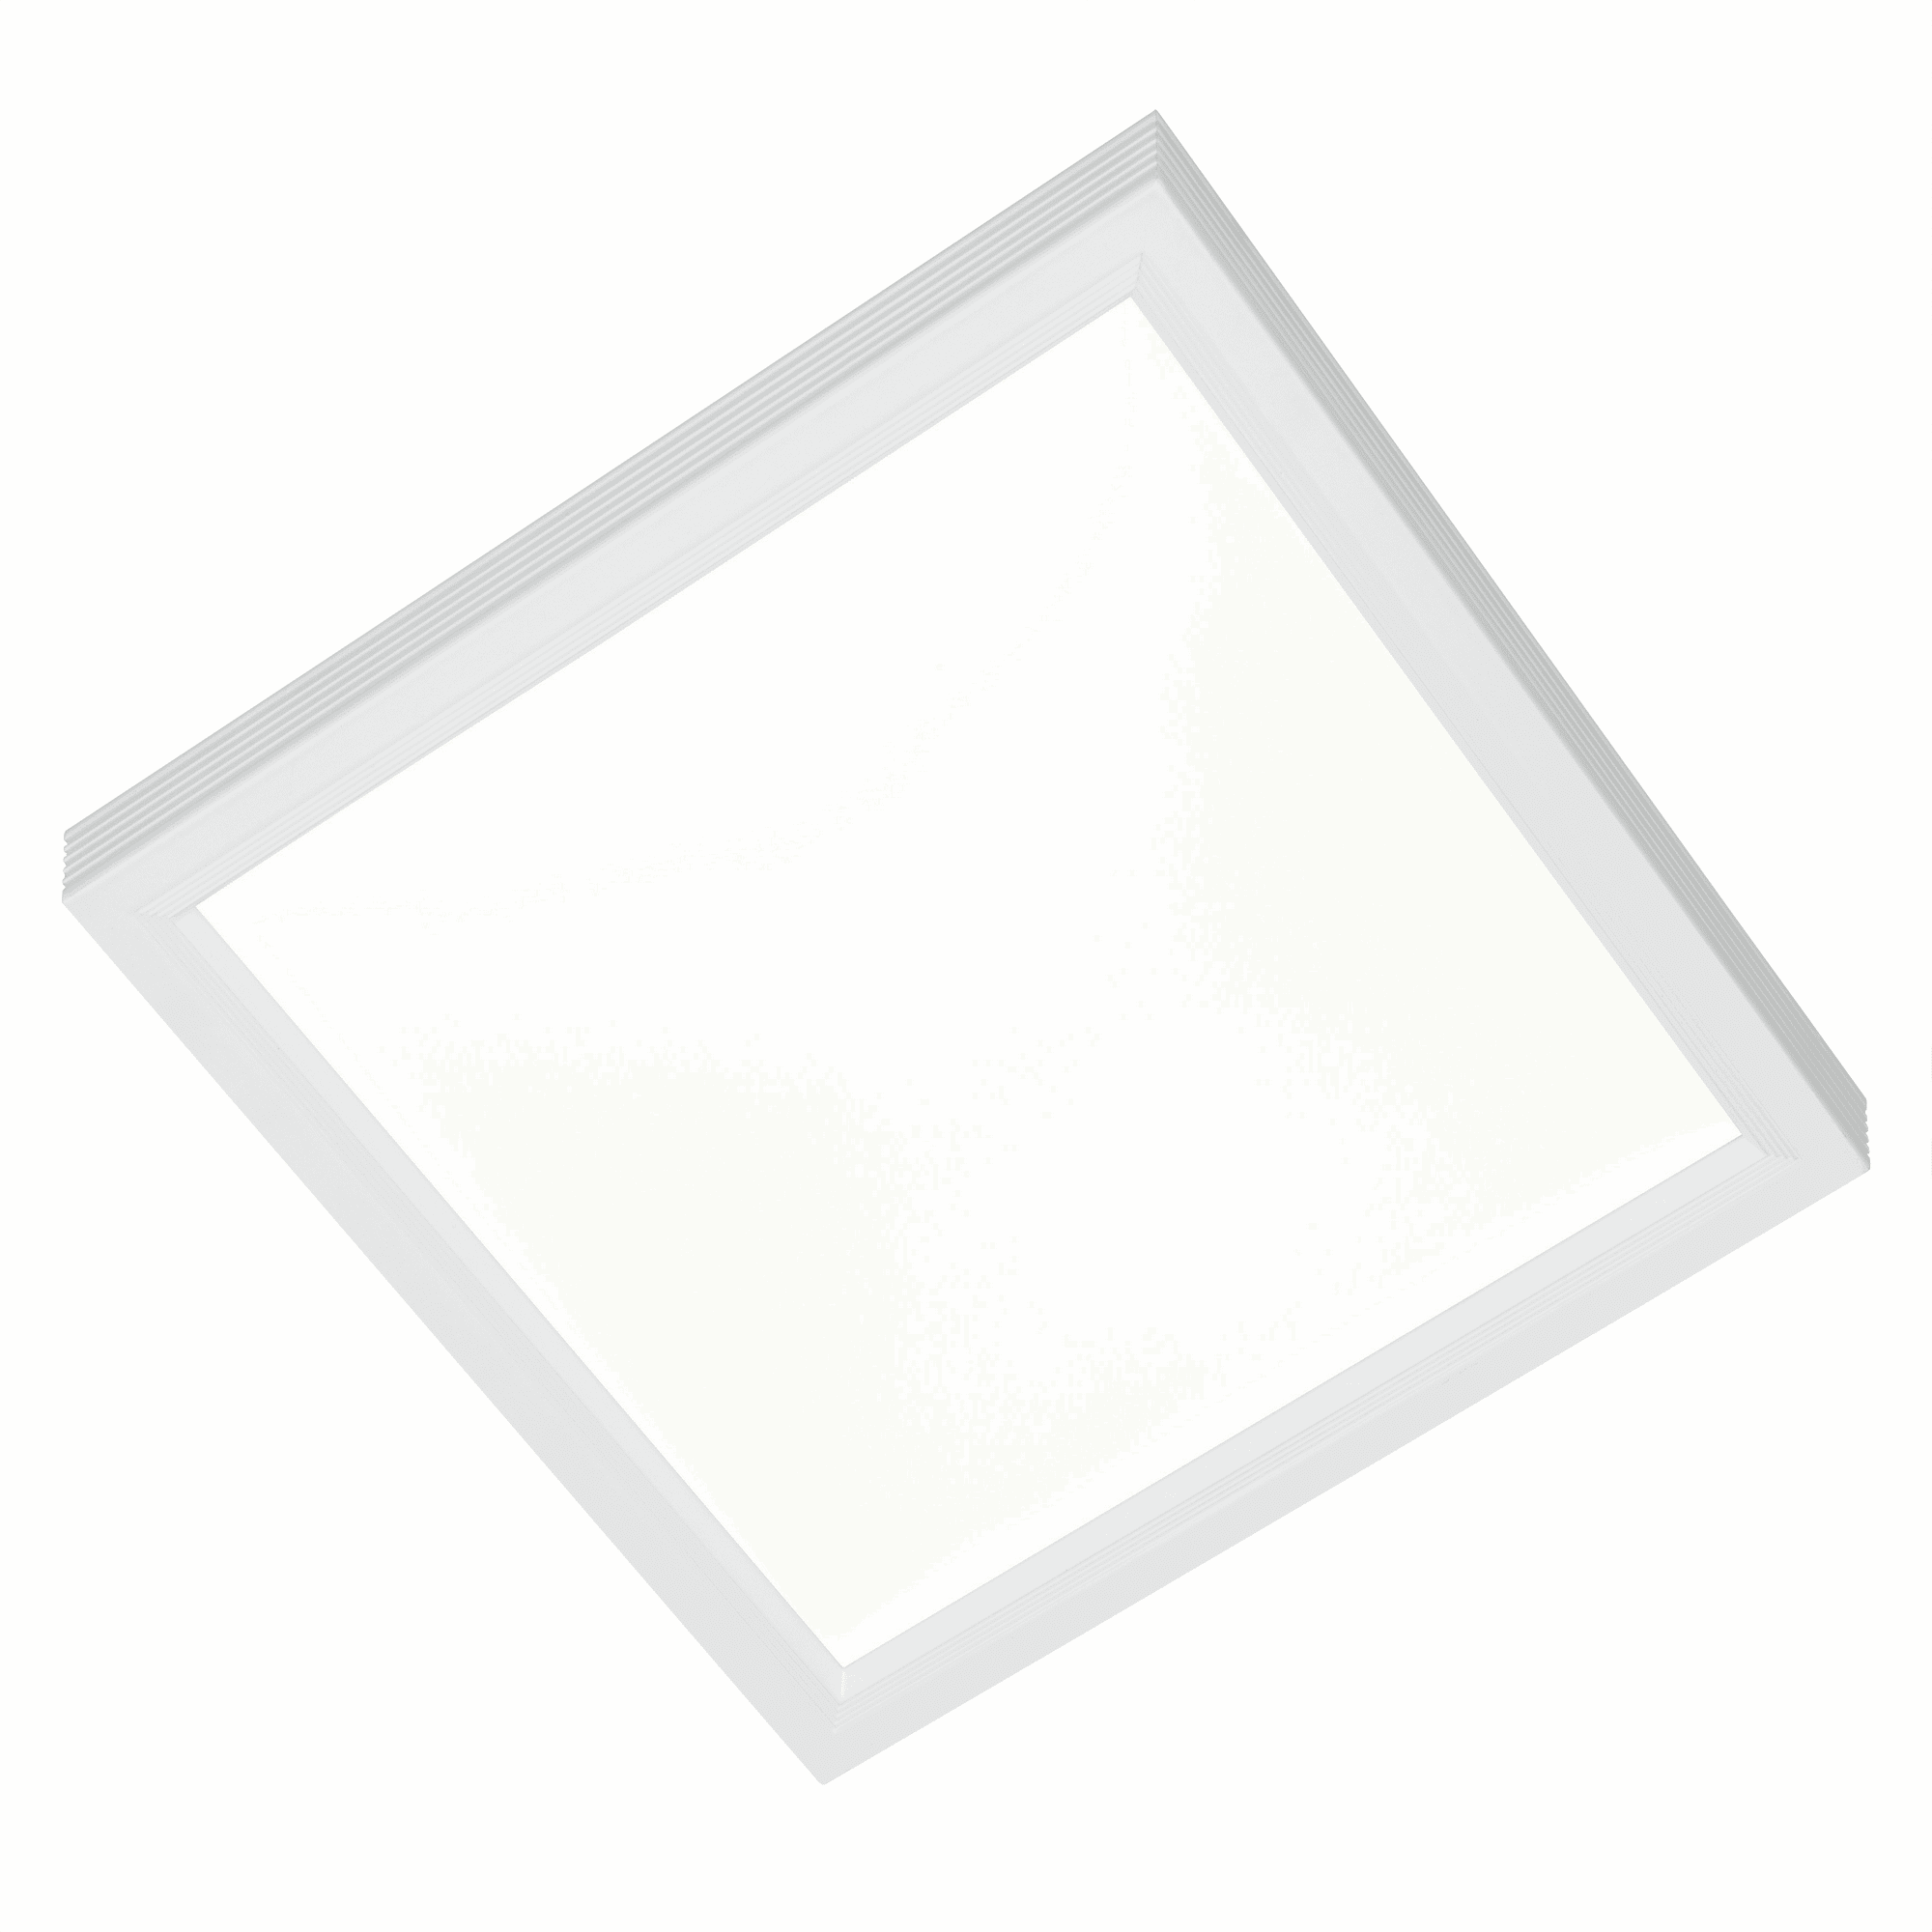 Deckenleuchte 'LED Panel' 29,5 x 29,5 x 5,4 cm farbwechselnd + product picture